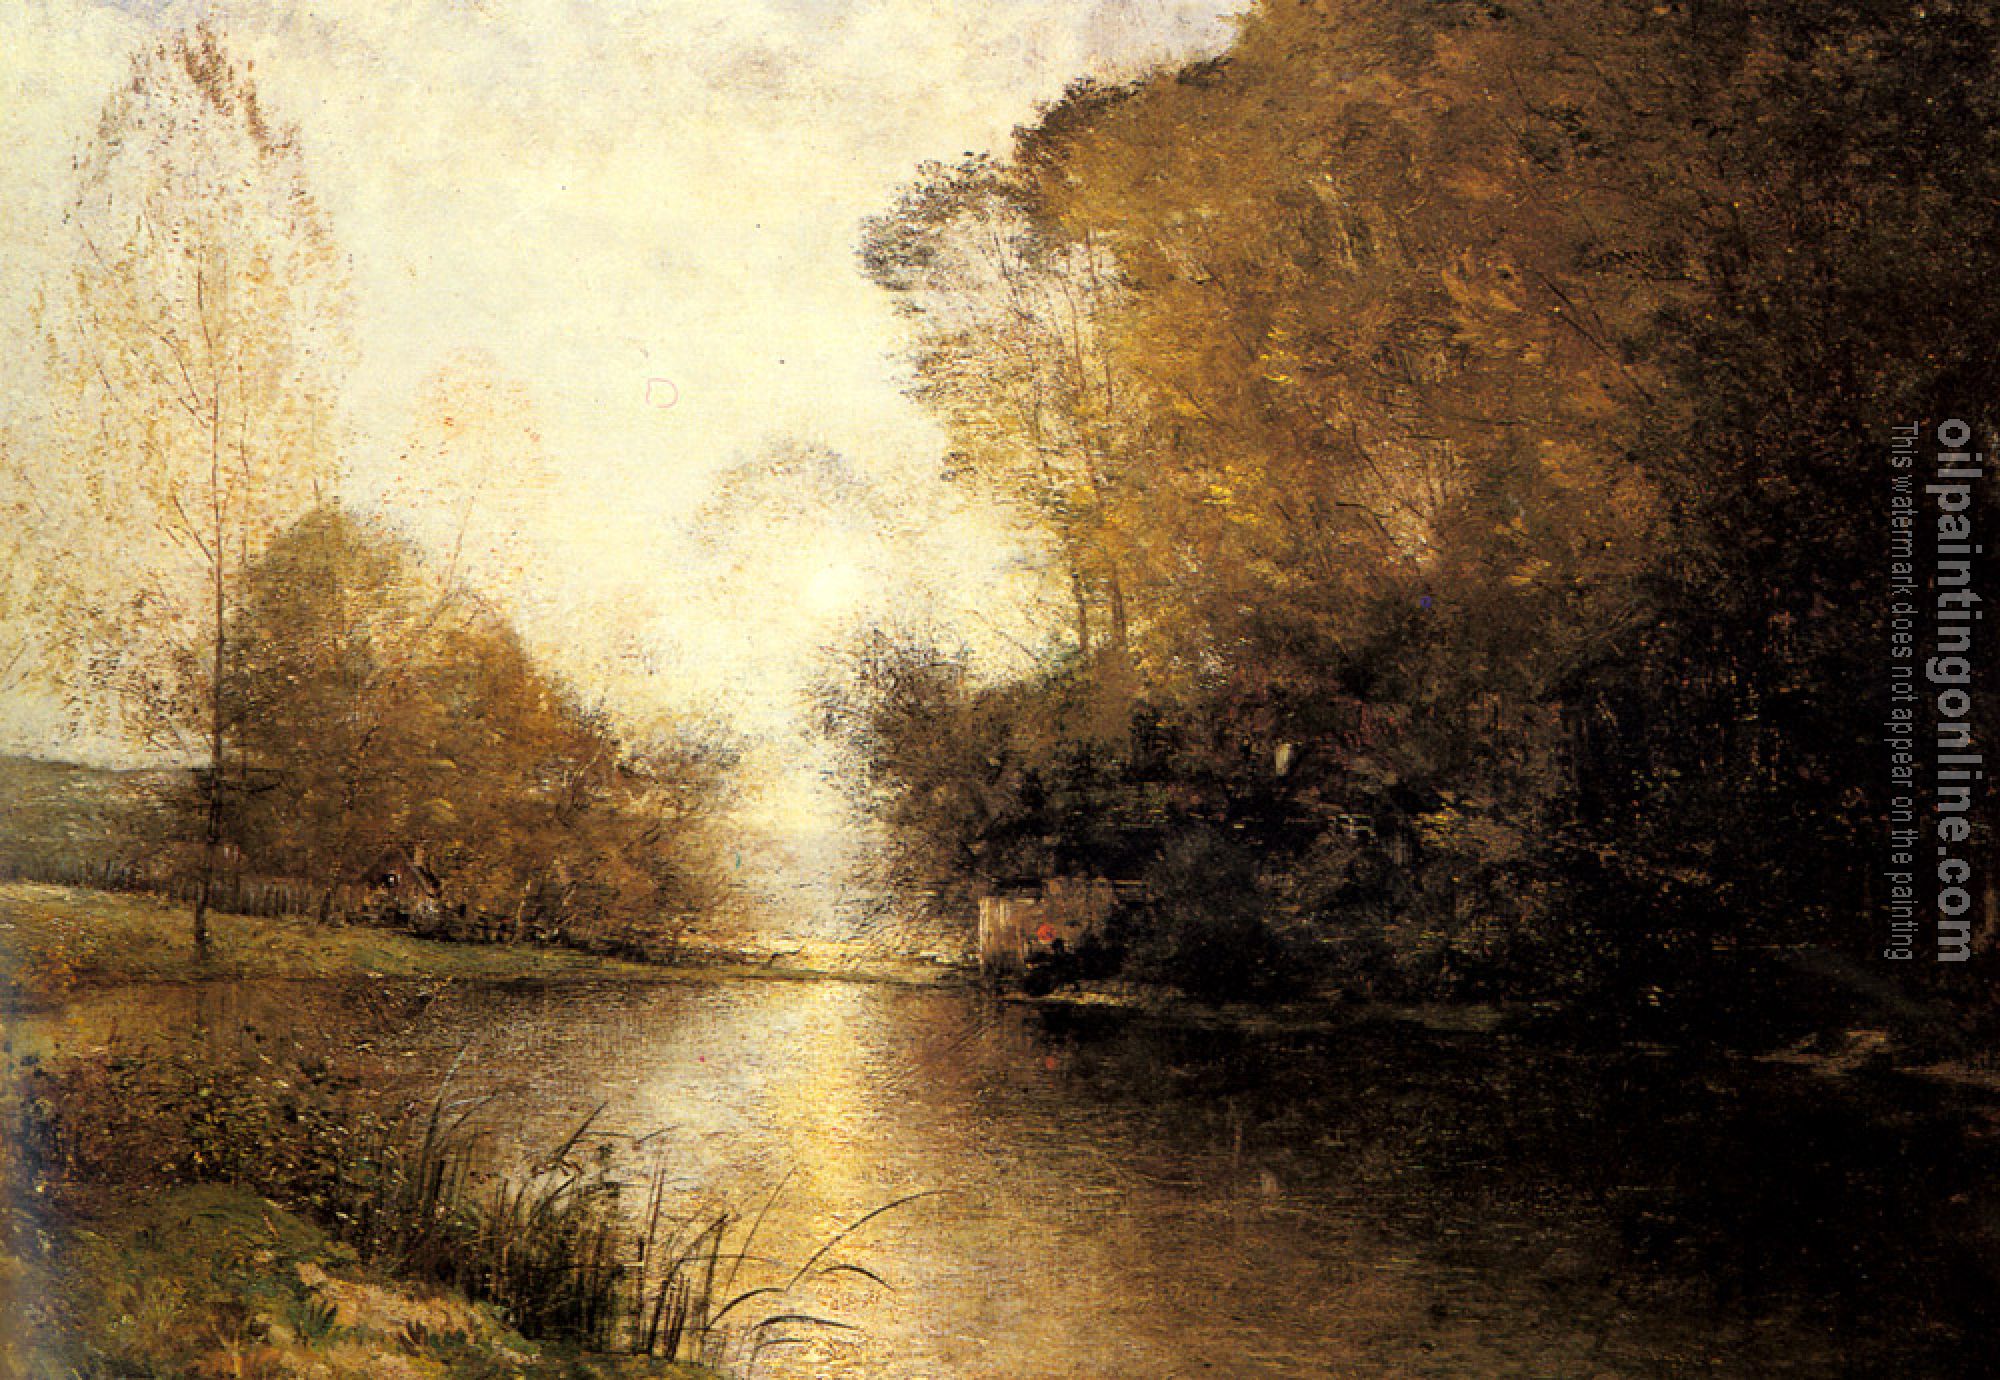 Wahlberg, Alfred - A Moonlit River Landscape with a Figure